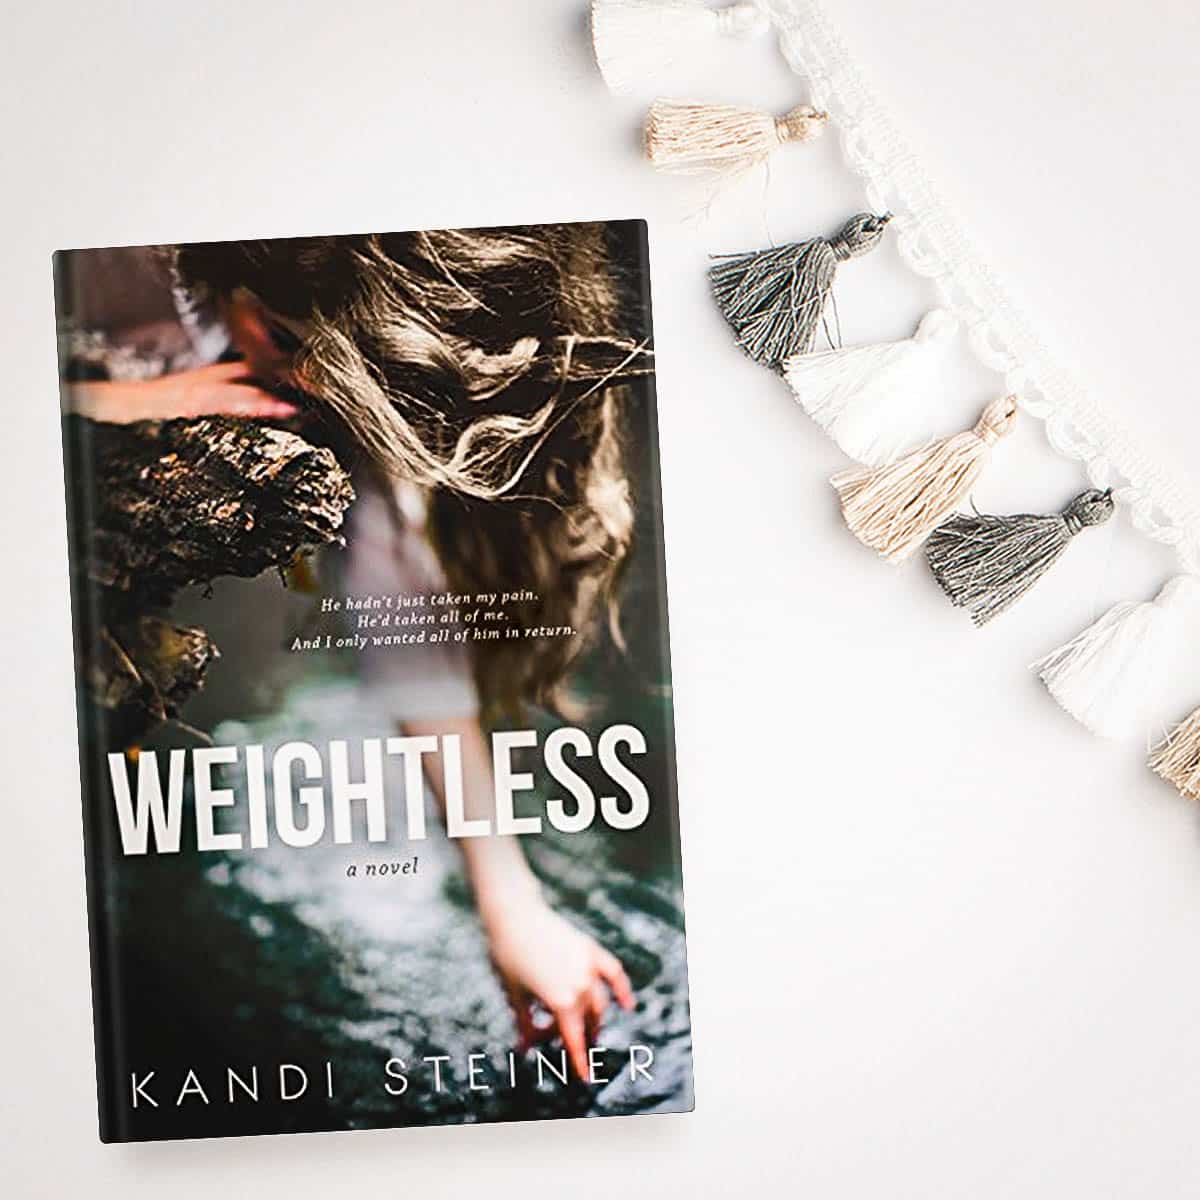 Weightless by Kandi Steiner is a beautifully written, raw, angsty, and sometimes heartbreaking story about a girl struggling with her identity and her autonomy after finishing high school and breaking up with her long-term boyfriend.